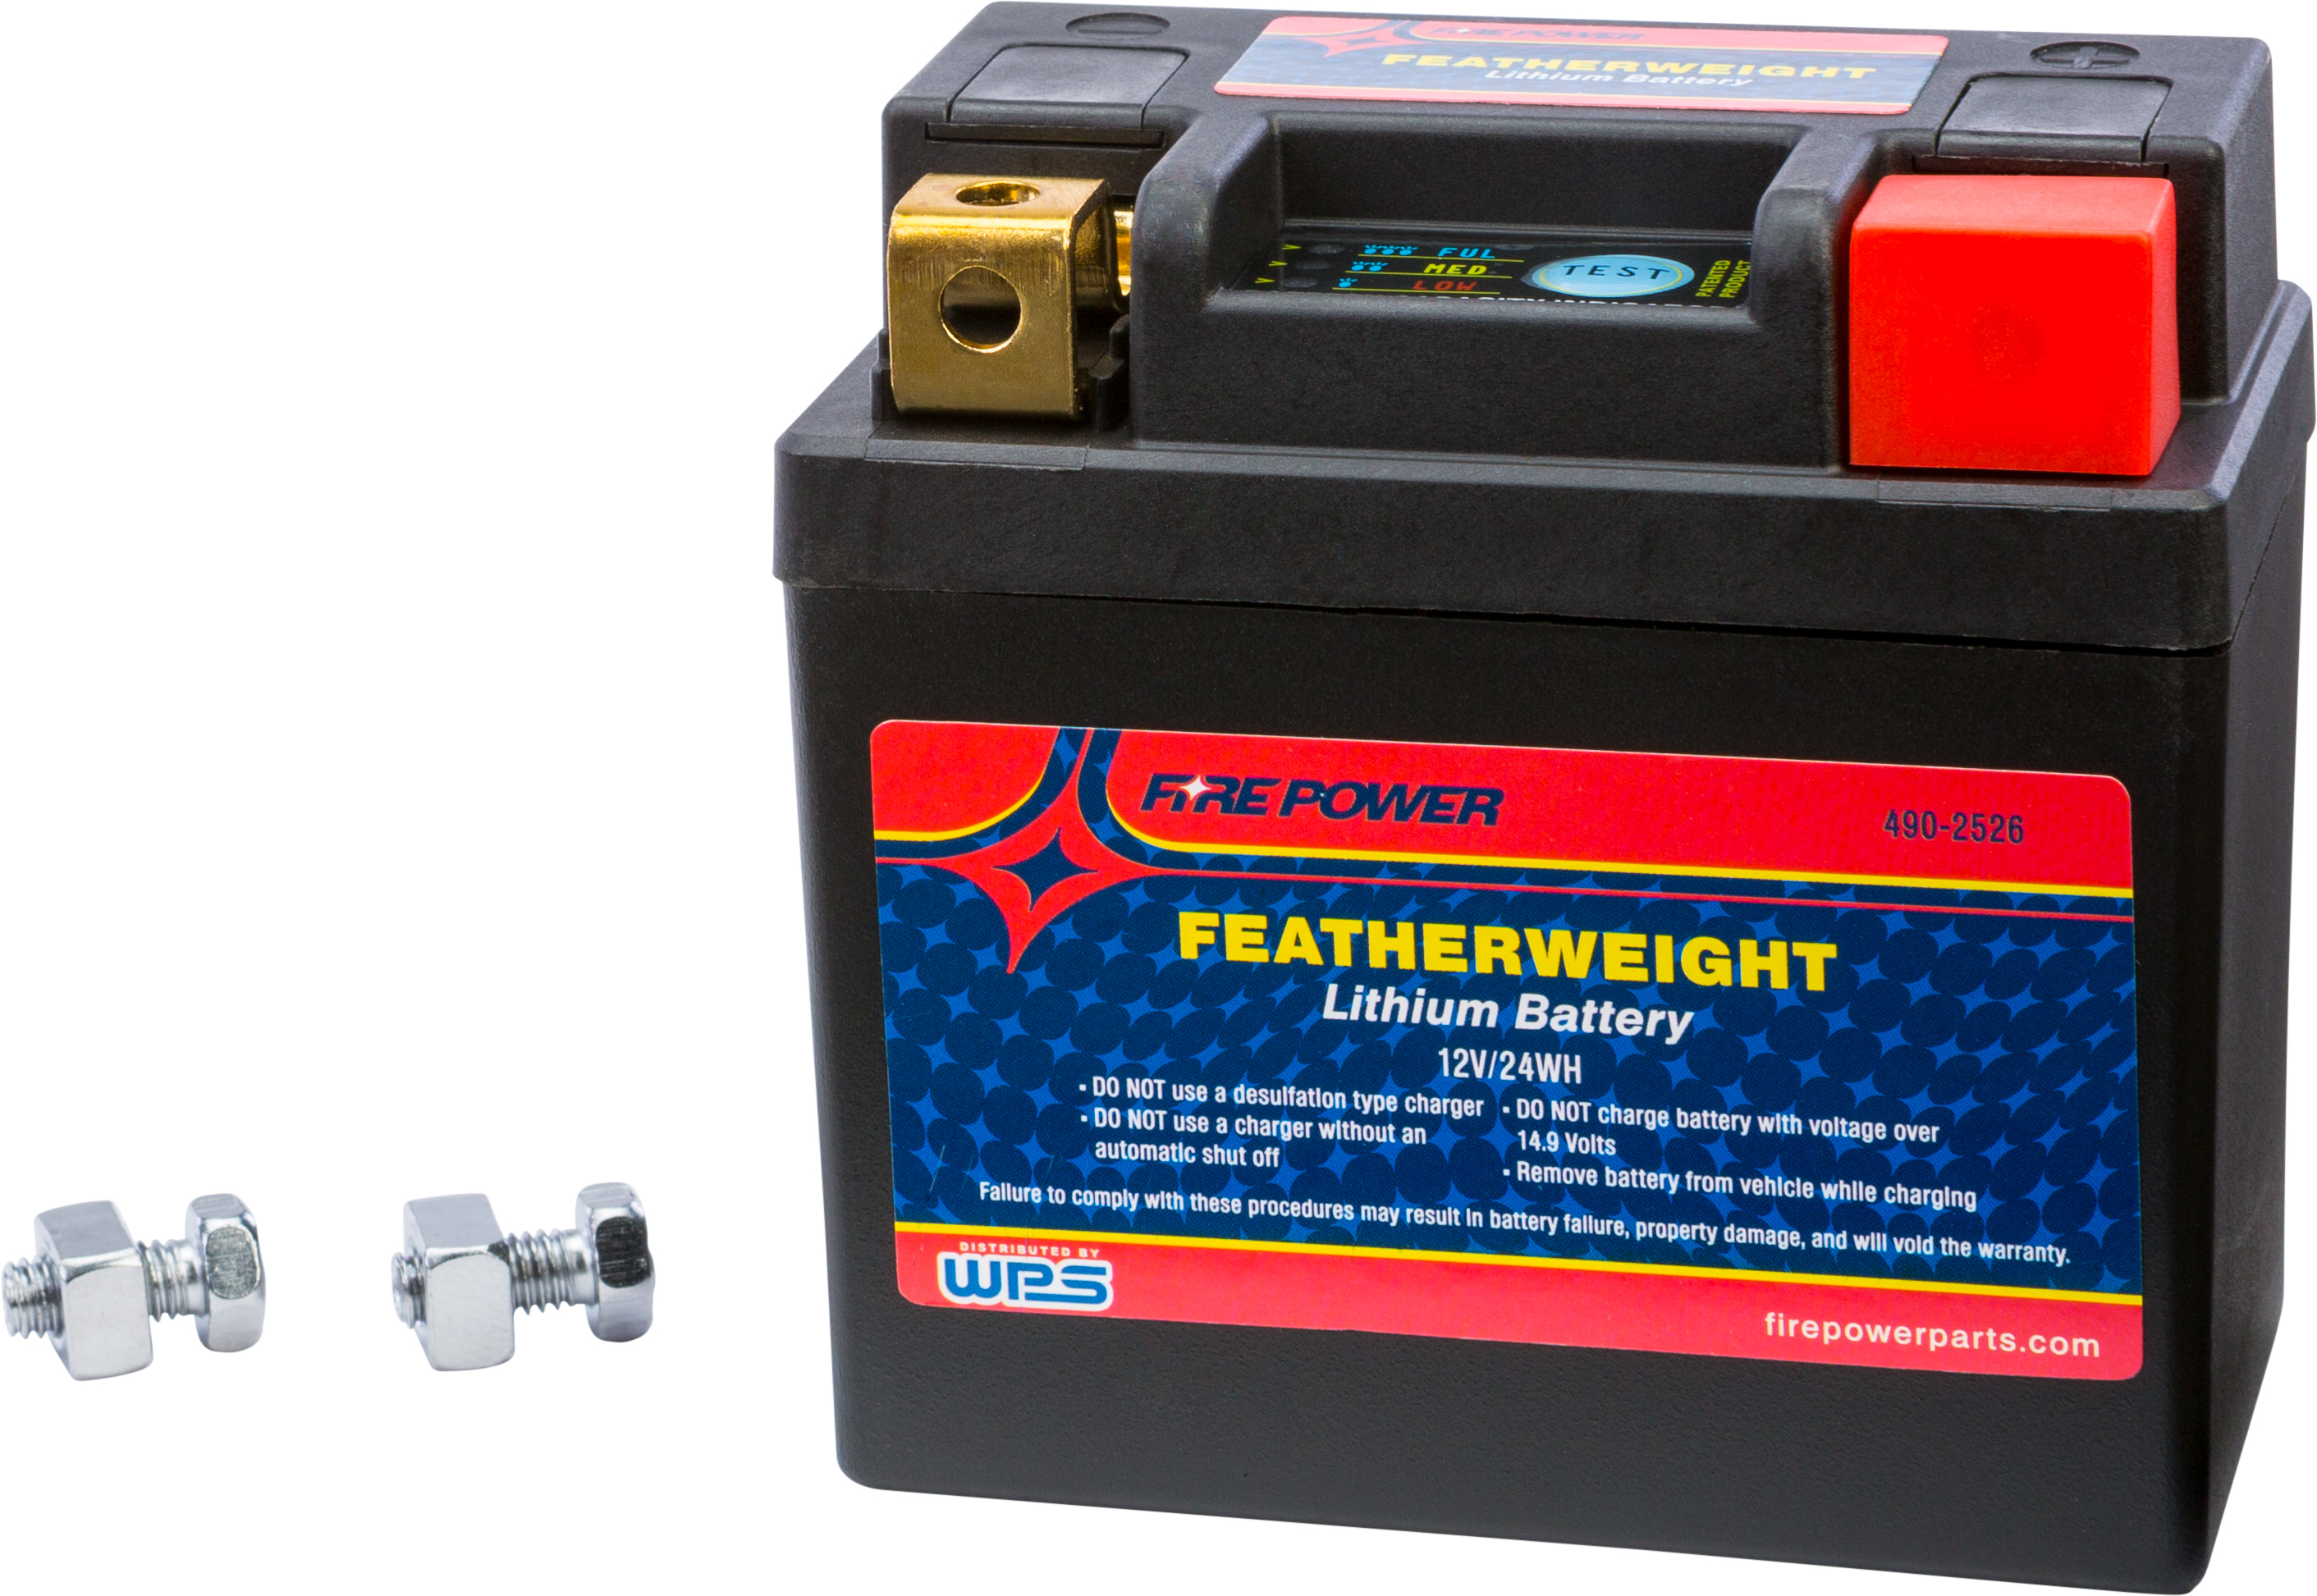 Fire Power - Featherweight Lithium Battery 140cca Hj04l-fp-il 12v/24wh - HJ04L-FP